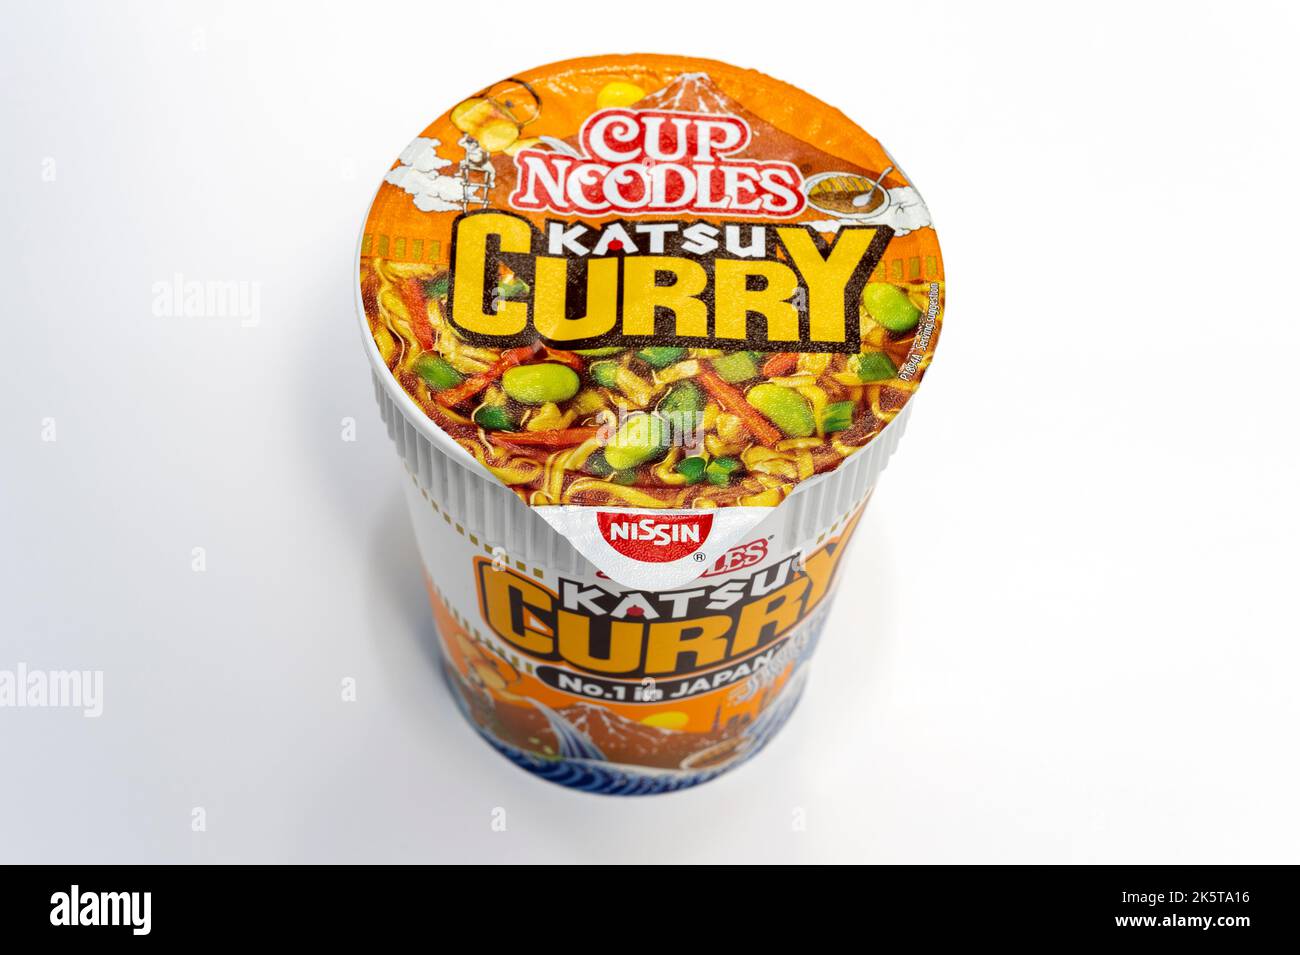 Cup Noodles Katsu Curry Stock Photo